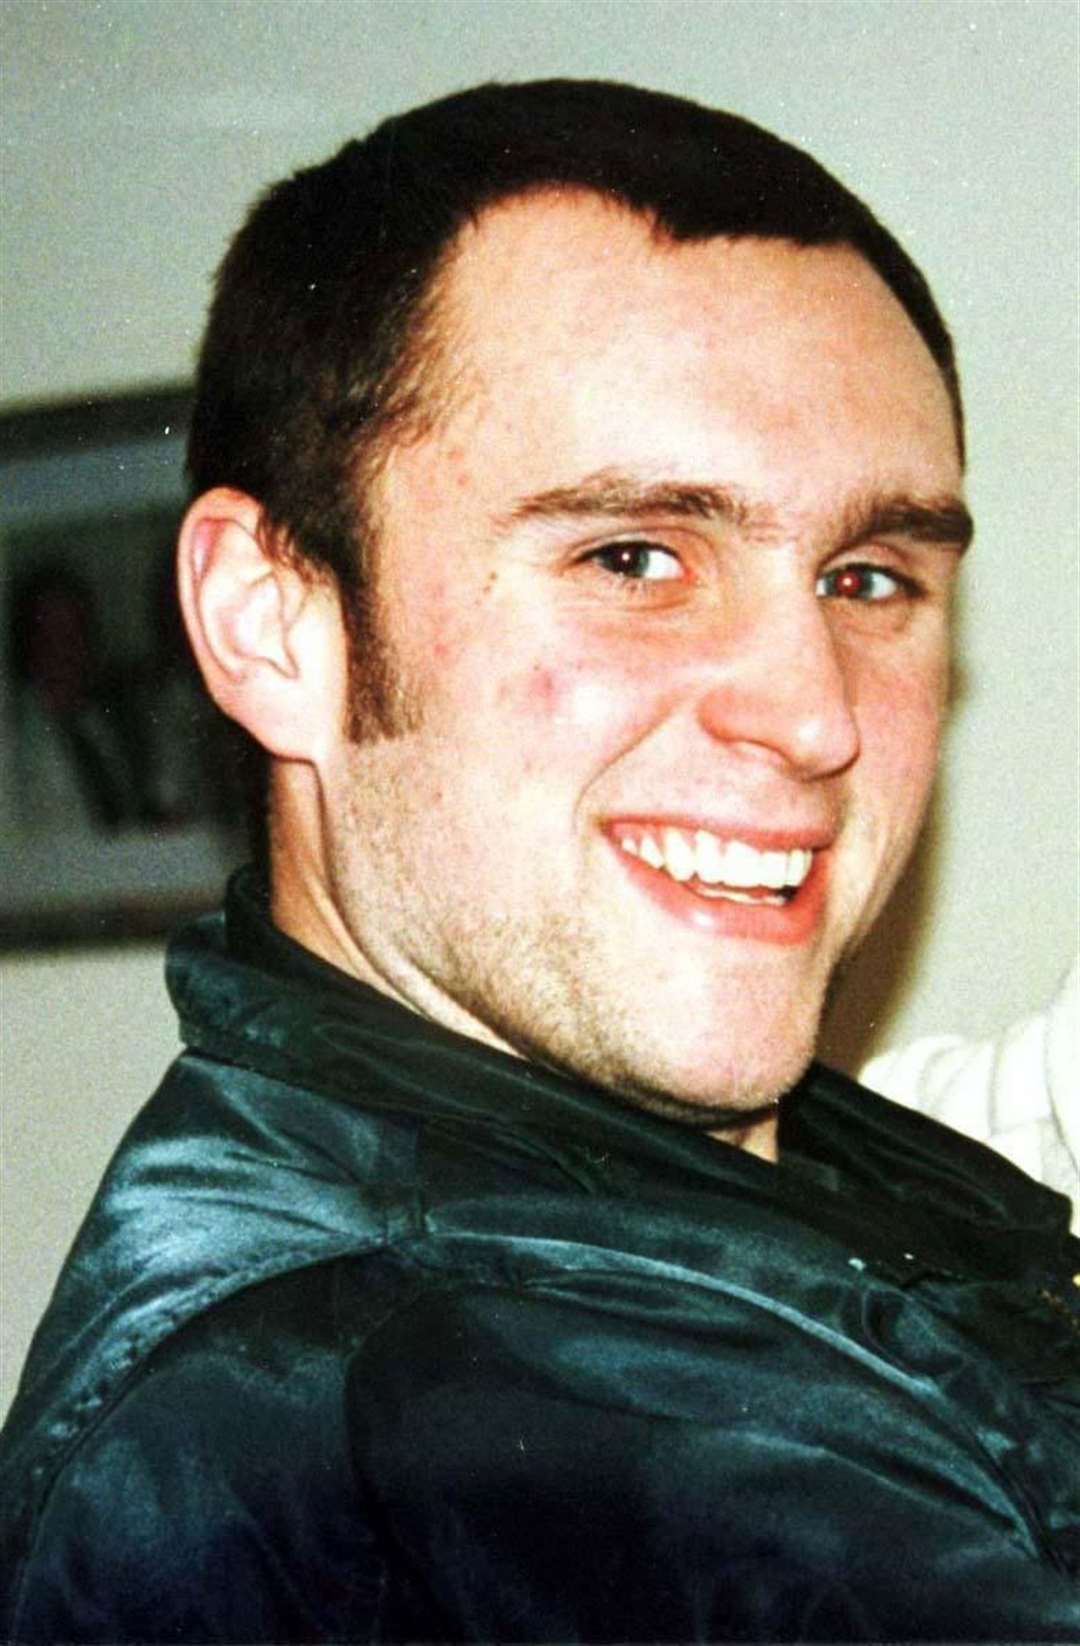 Stephen Cameron, who was murdered by Stephen Noye in a road rage incident in 1996